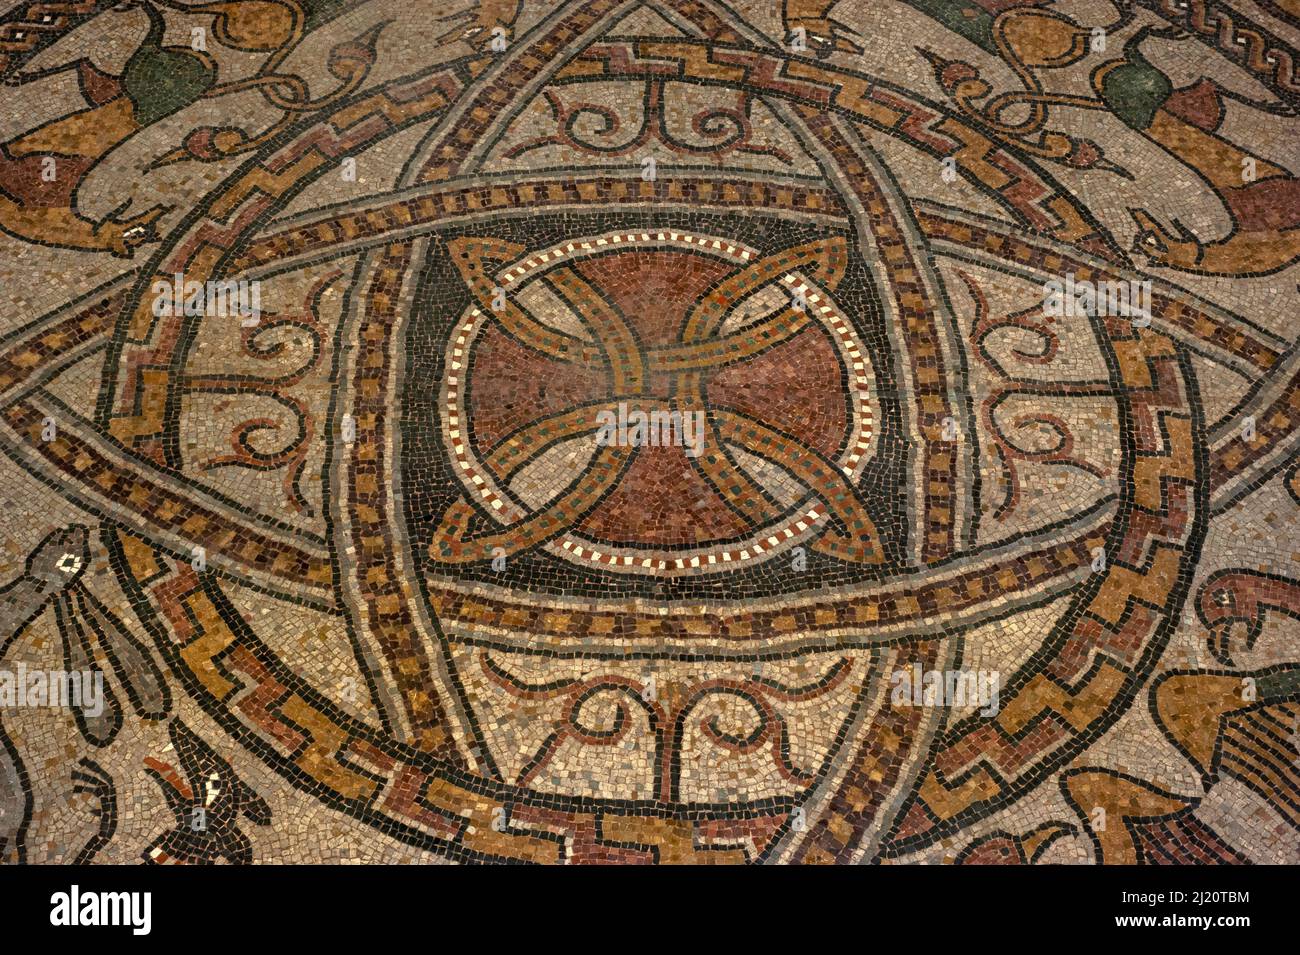 Interlaced decorative bands, surrounded by animals and birds.  Centre of medieval mosaic in restored late-1000s or early 1100s pavement in former Benedictine abbey church at Sorde l'Abbaye, Landes, Nouvelle-Aquitaine, France. Stock Photo